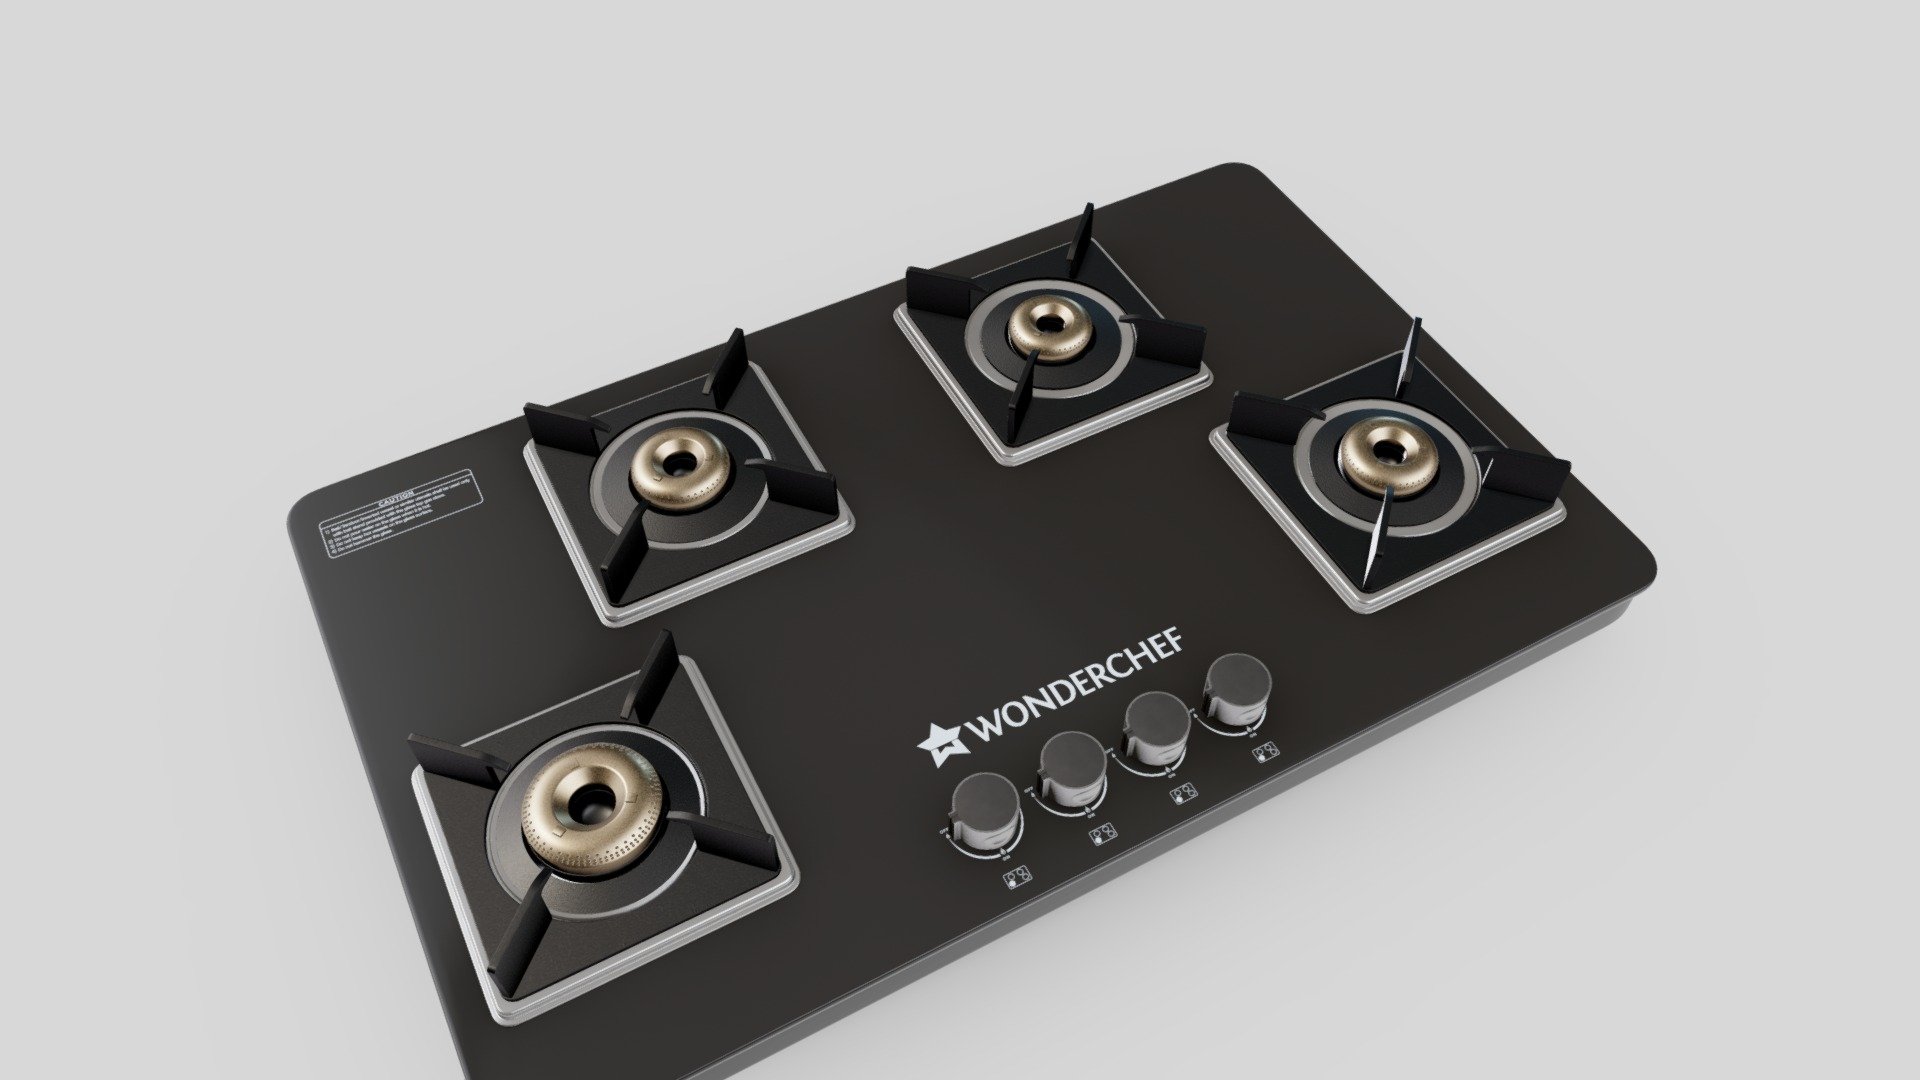 Check out this high quality 3D model of a Kitchen Cooktop.

For your 3D modelling requirements or if you wish to purchase this model, connect with us at info@shinobu3d.com.

We offer premium quality low poly 3D assets/models for AR/VR applications, 3D visualisations, 3D product configurators, 3D printing &amp; 3D animations.

Visit https://www.shinobu3d.com for more on us 3d model